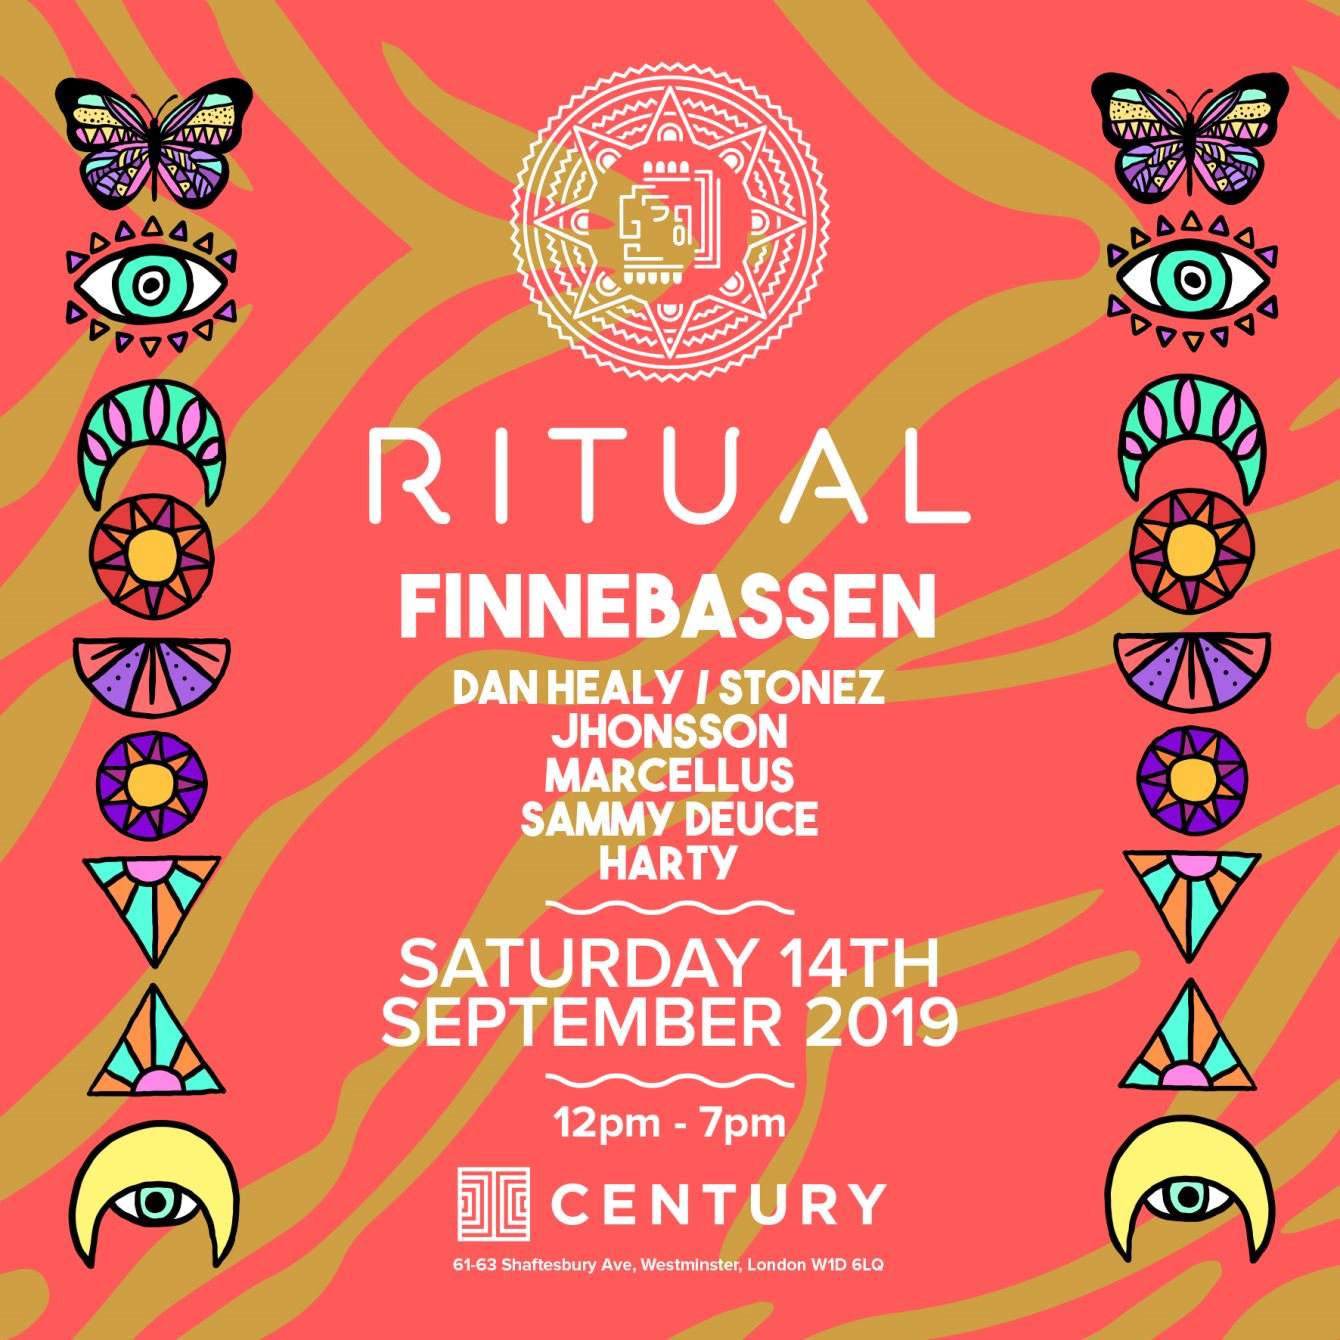 Ritual - Summer Closing Rooftop Party with Finnebassen - フライヤー表